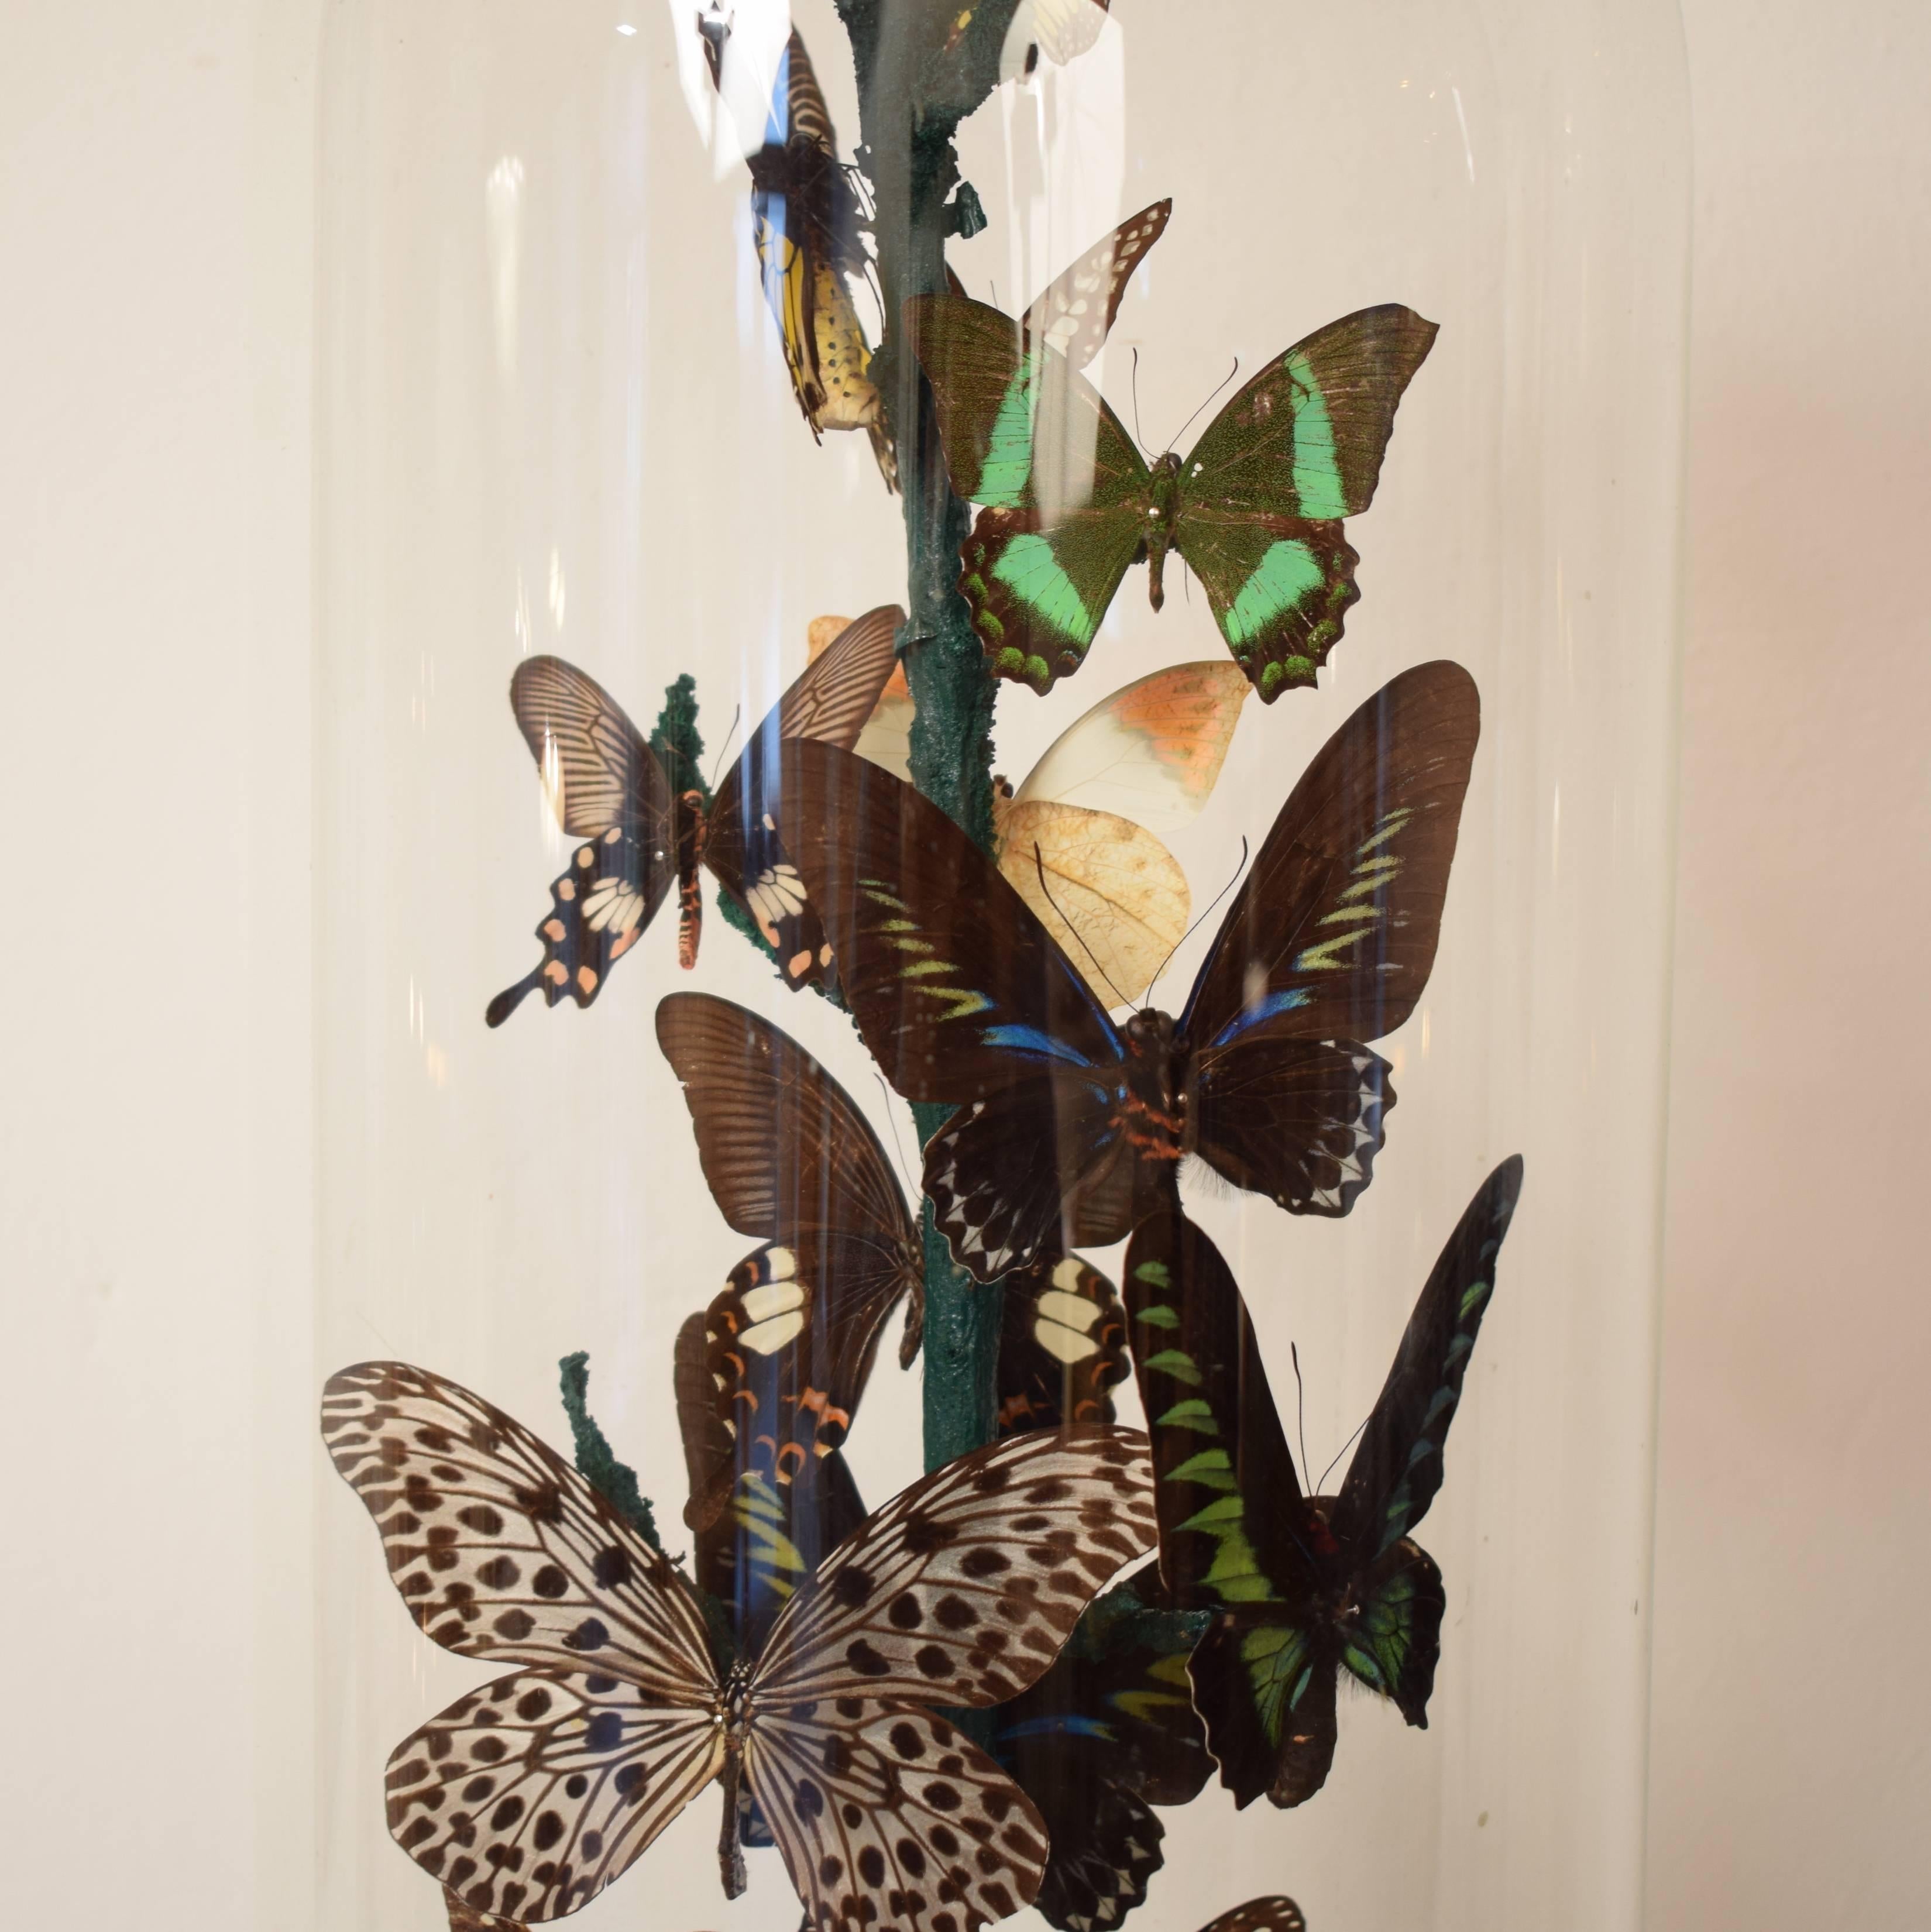 This early 20th century Wunderkammer Butterfly Dome show 14 natural butterflies mounted on a branch.
The butterflies are all different and show a wide range of colors.